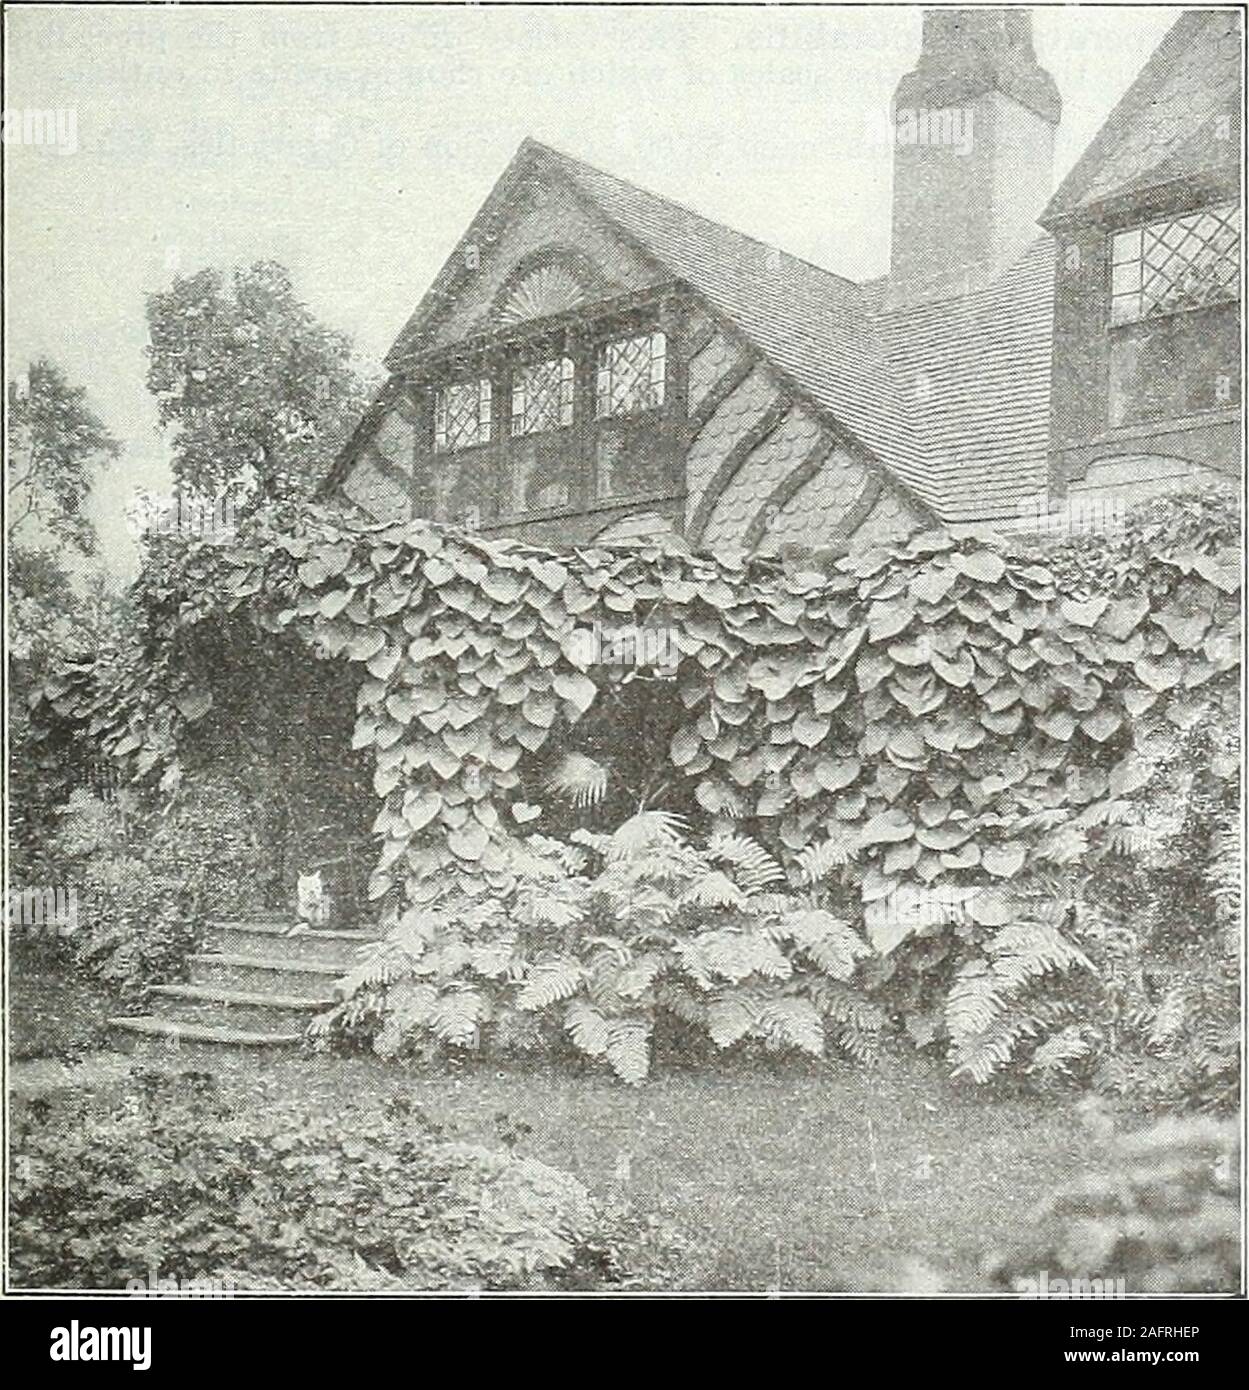 . Farquhar's autumn catalogue : 1921. m Ibota.) Very hardy and ornamental, de-sirable for partial shade, should be closely trimmed for three or fouryears, if compact form is desired. Doz. 1001 to lift. S2.50 $16.00 HARDY CLIMBING AND CREEPING VINES. ACTINIDIA arguta. Dark green, shining foliage and white flowers.Excellent for arbors, trellises, etc. $1.25 each; $12.00 per doz. AKEBIA quinata. Rich green, clover-like foliage and pendulous clustersof dark purple flowers. 75 cts. each; $7.50 per doz. AMPELOPSIS quinquefolia. (Virginia Creeper, or Common Woodbine.)50 cts. each; $5.00 per doz.; $35 Stock Photo